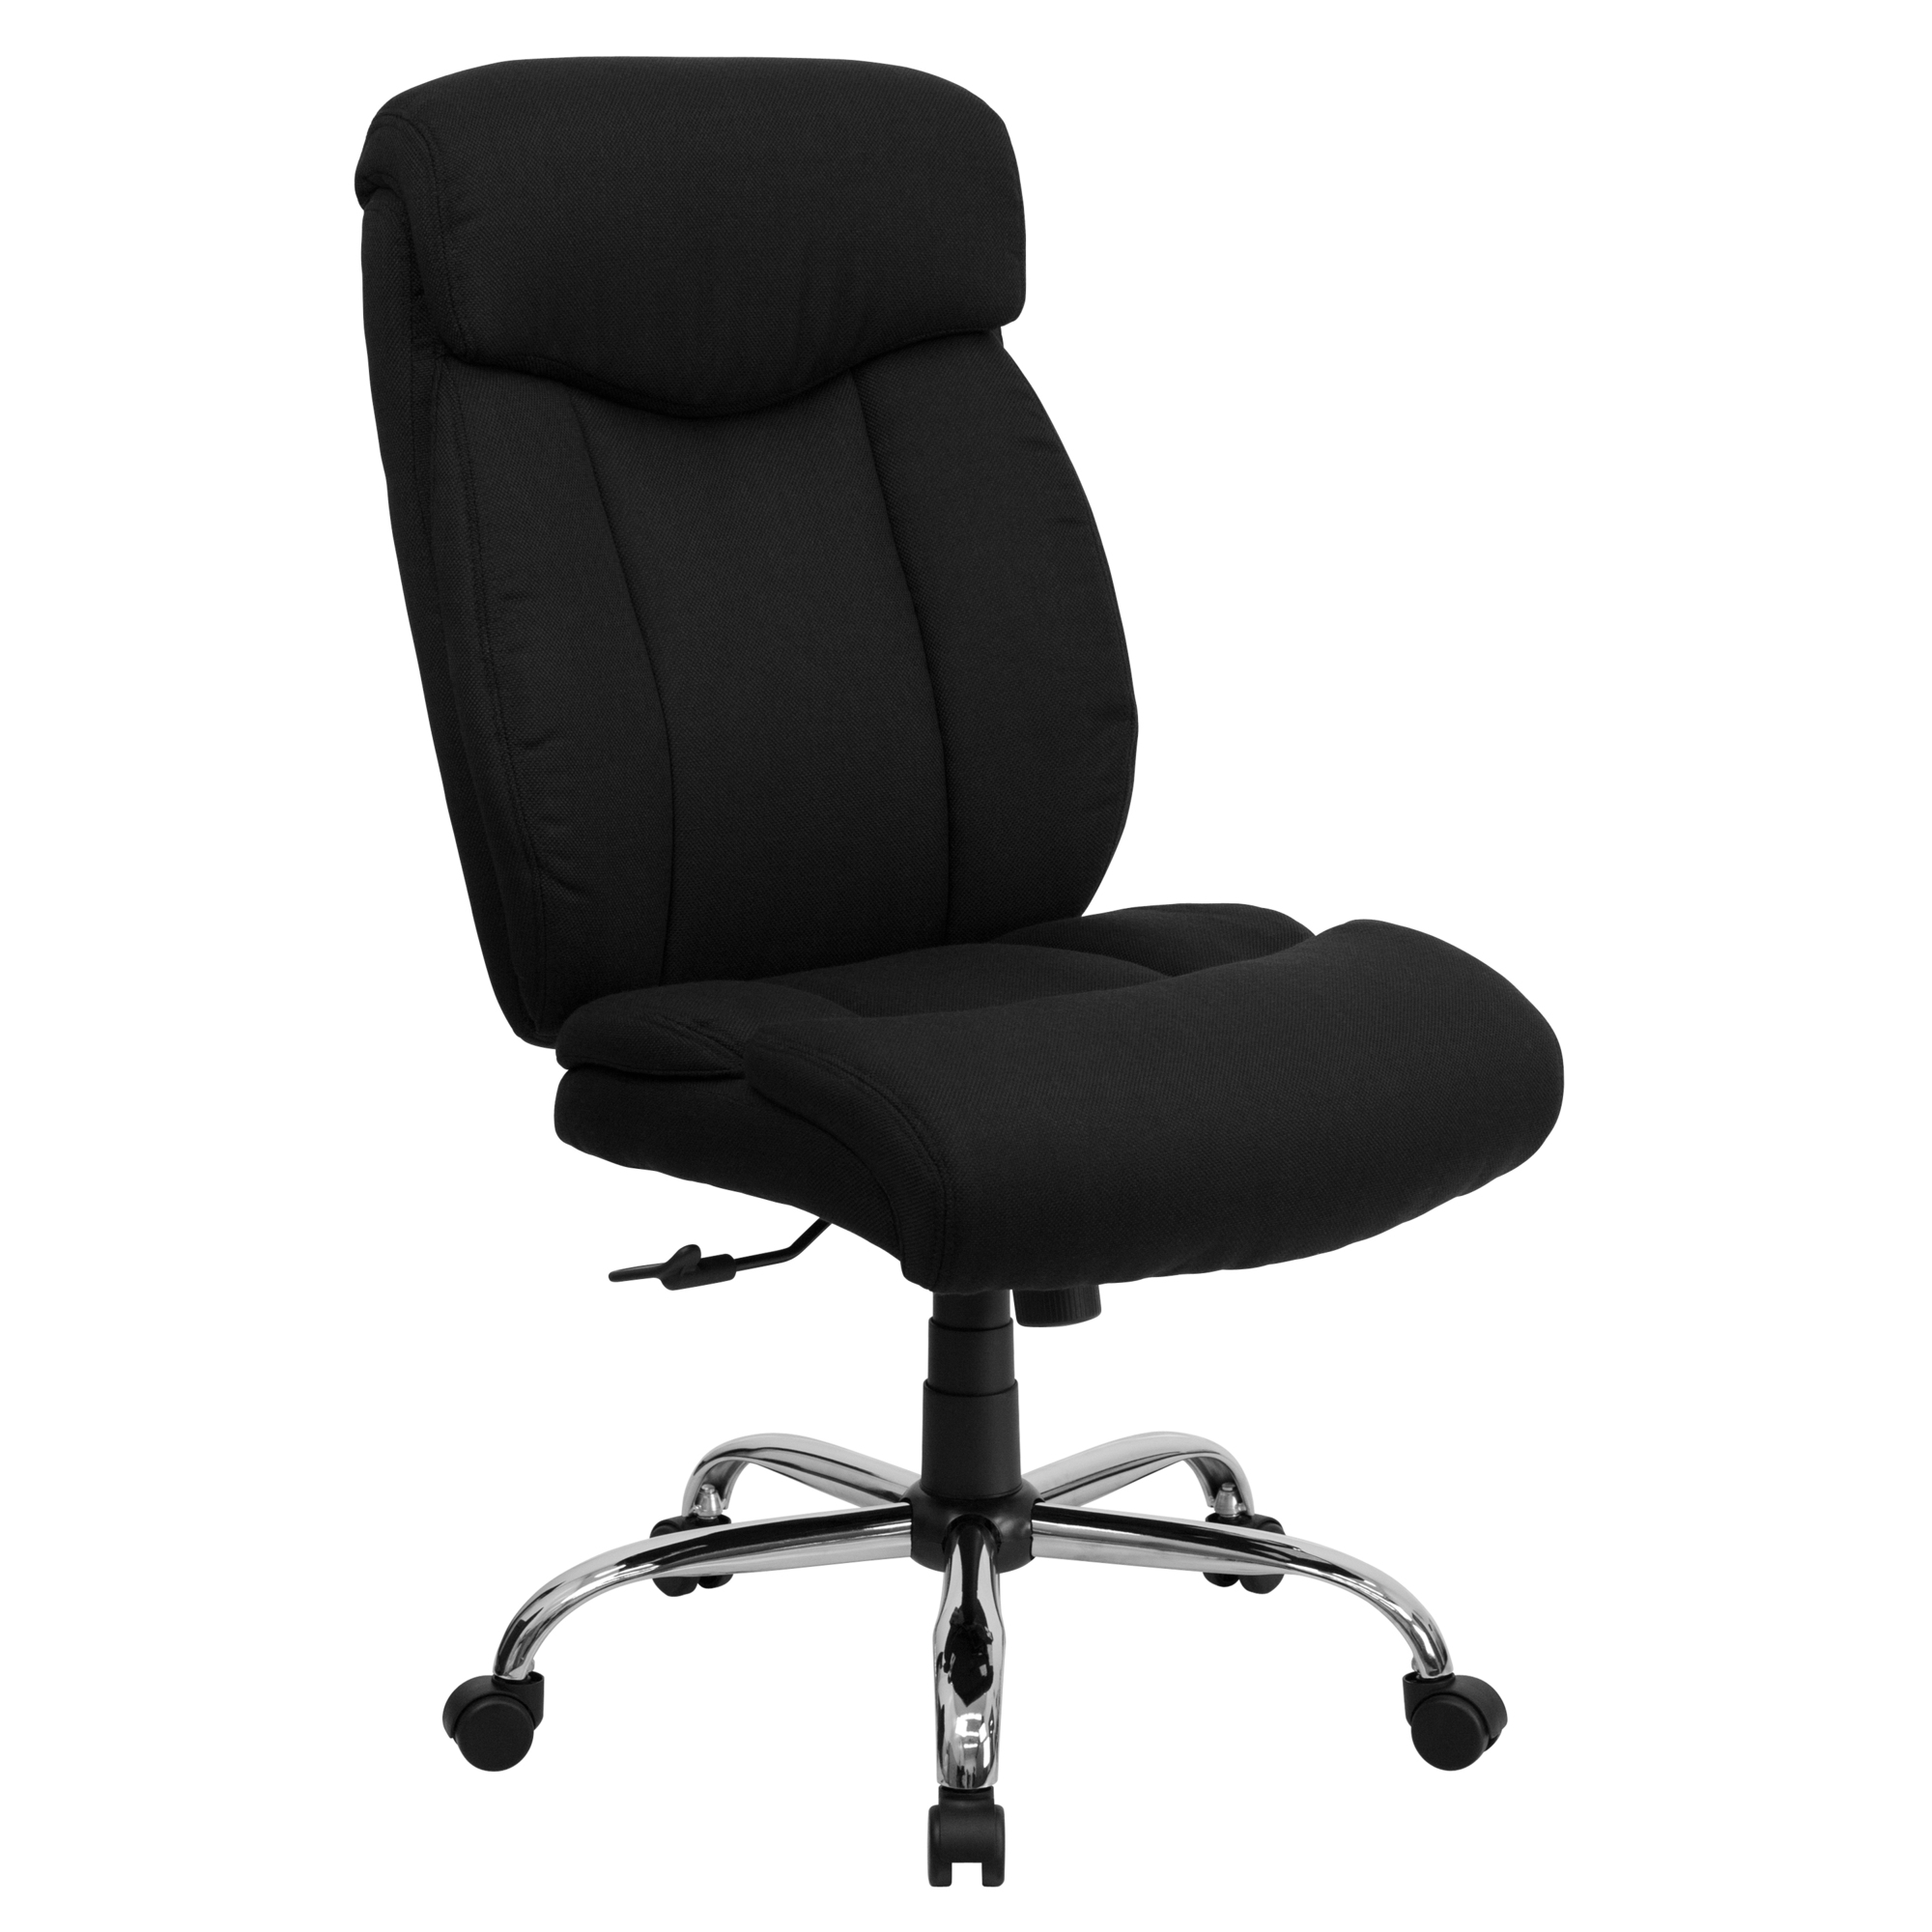 Flash Furniture, Big Tall 400 lb. Rated Black Fabric Chair, Primary Color Black, Included (qty.) 1, Model GO1235BKFAB